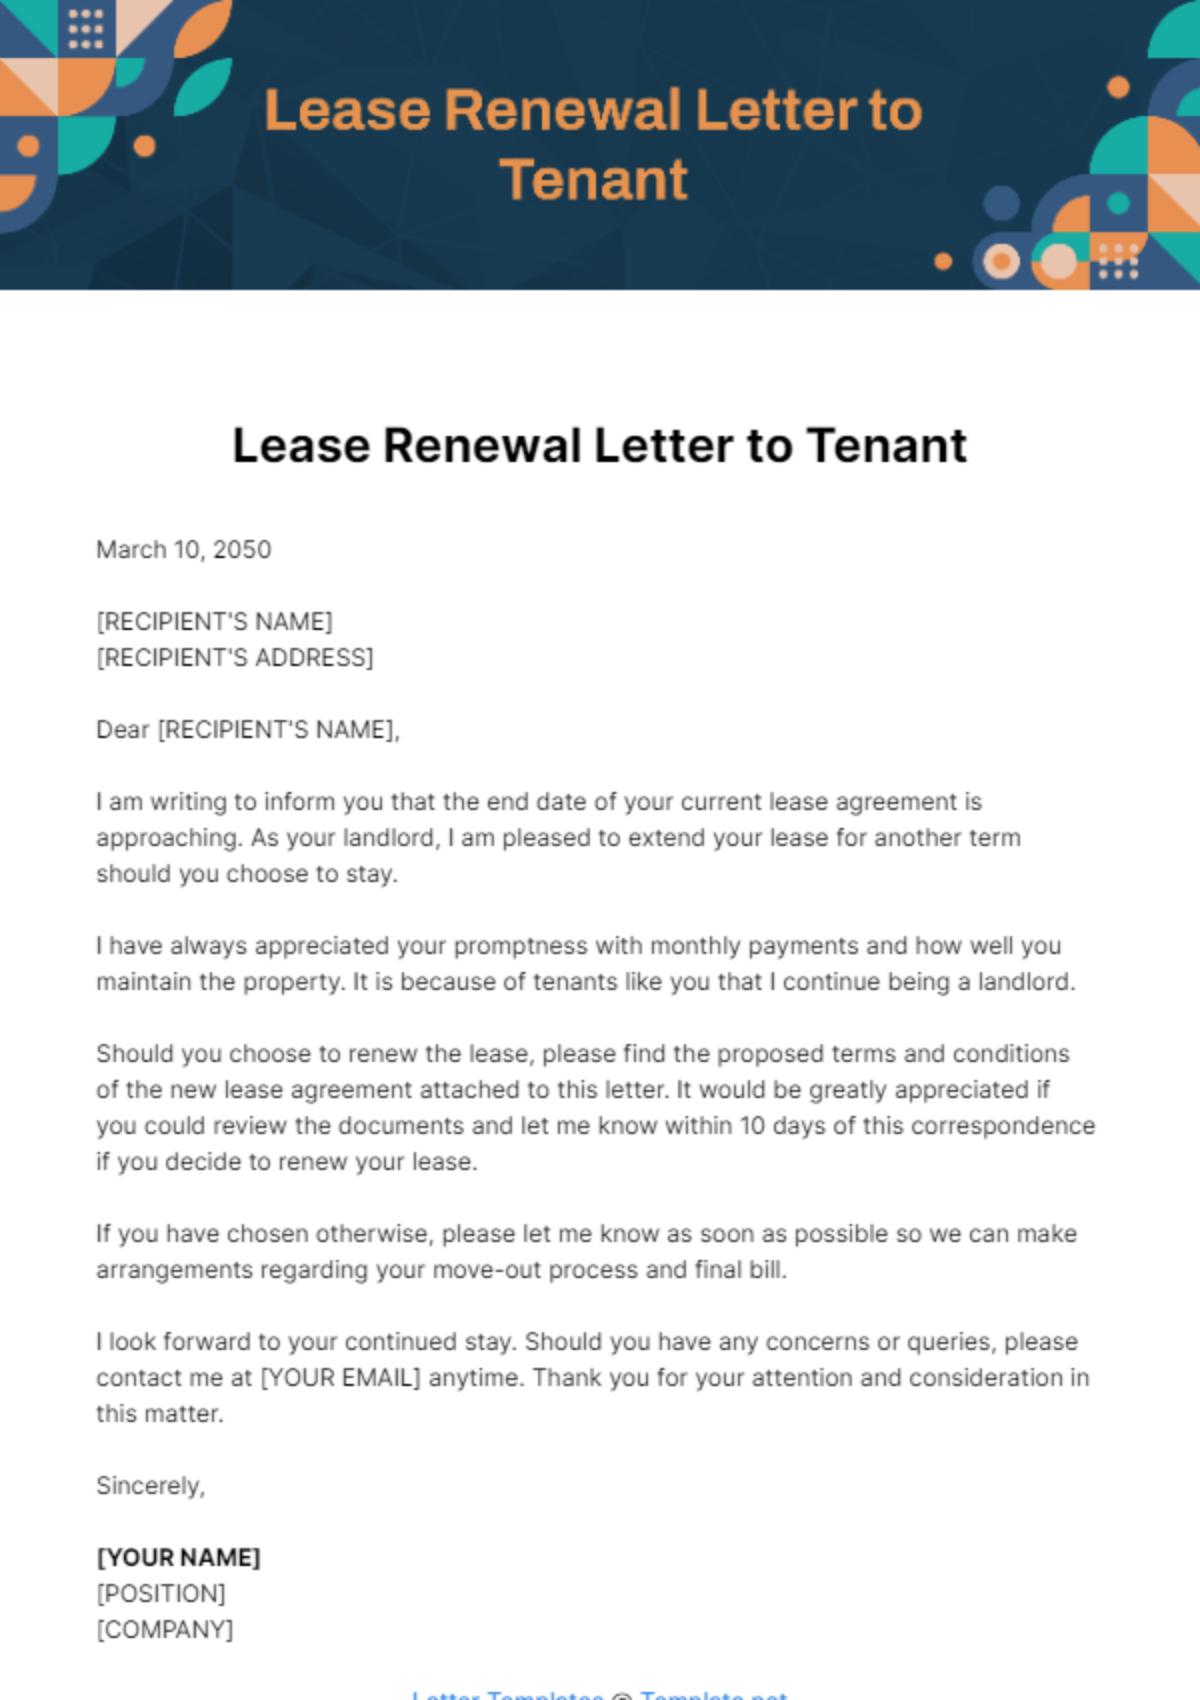 Free Lease Renewal Letter to Tenant Template